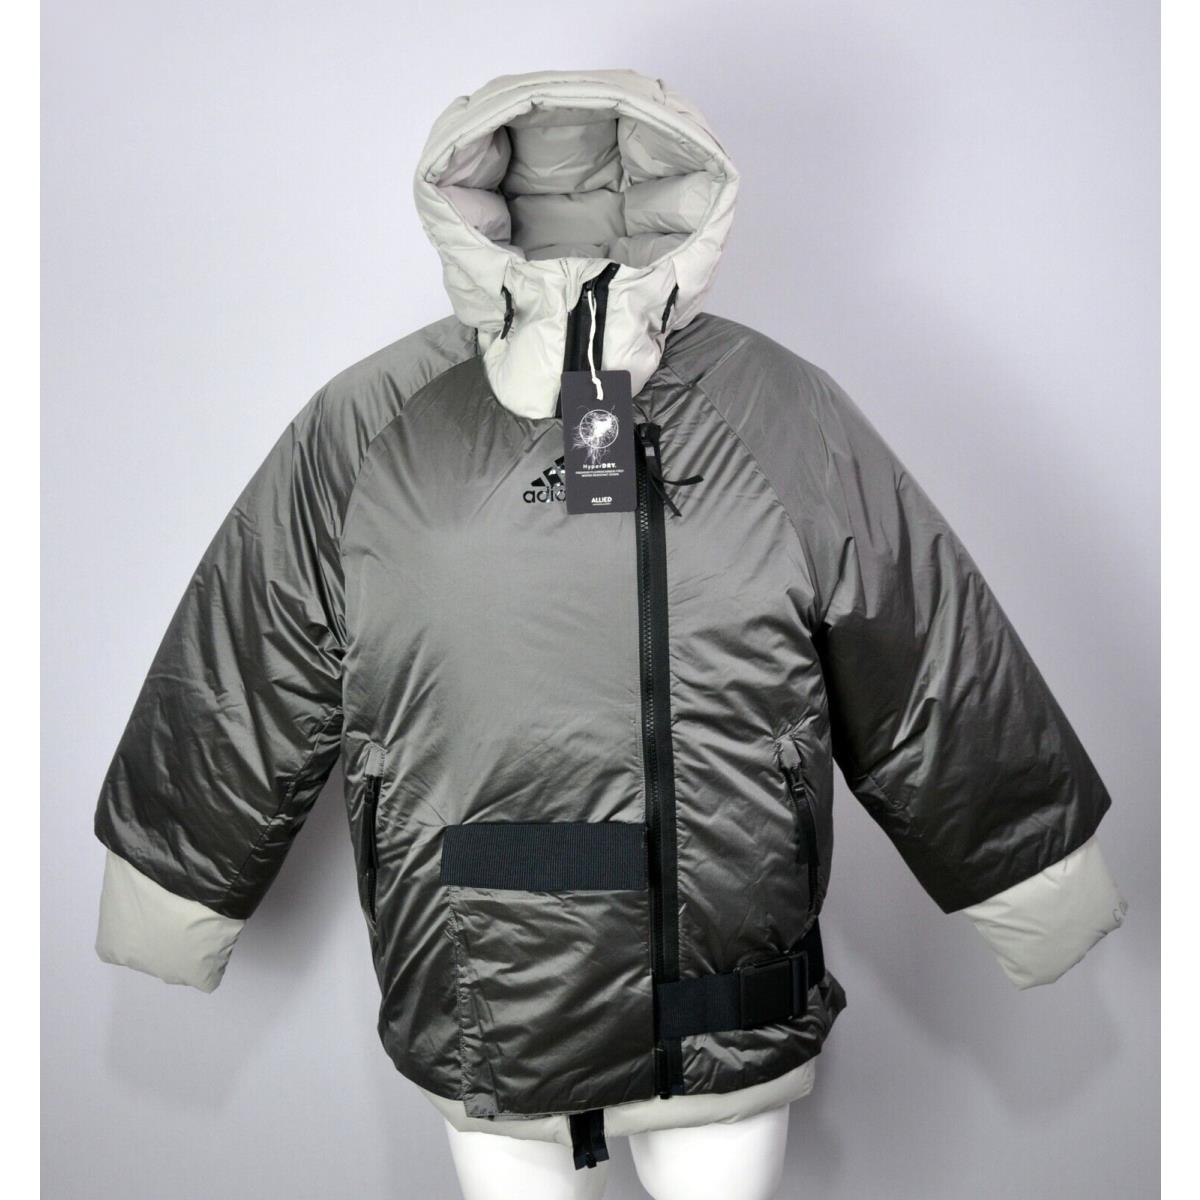 Adidas Cold.rdy Puffer Duck Down 2 in 1 Convertible Jacket Women`s Size XS Gray